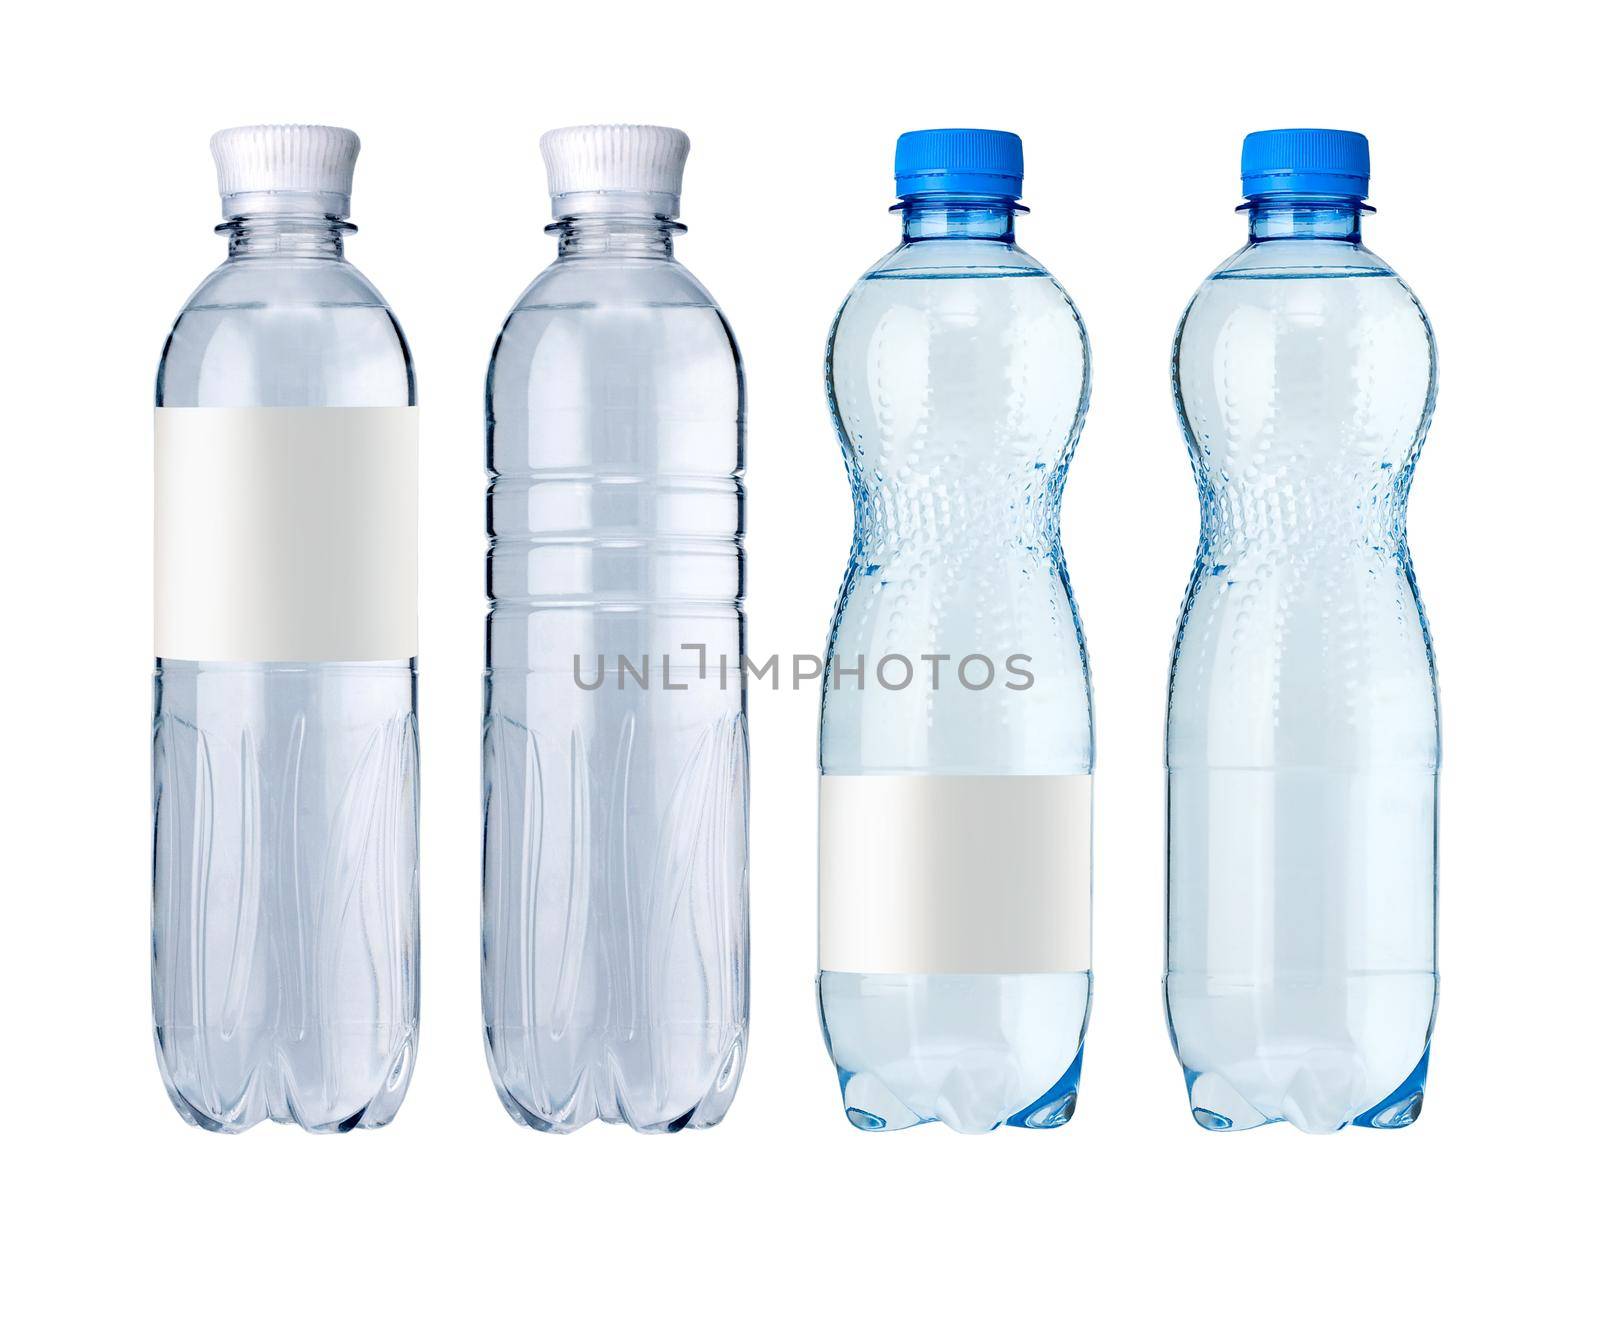 Soda water bottles with blank label. Isolated on white